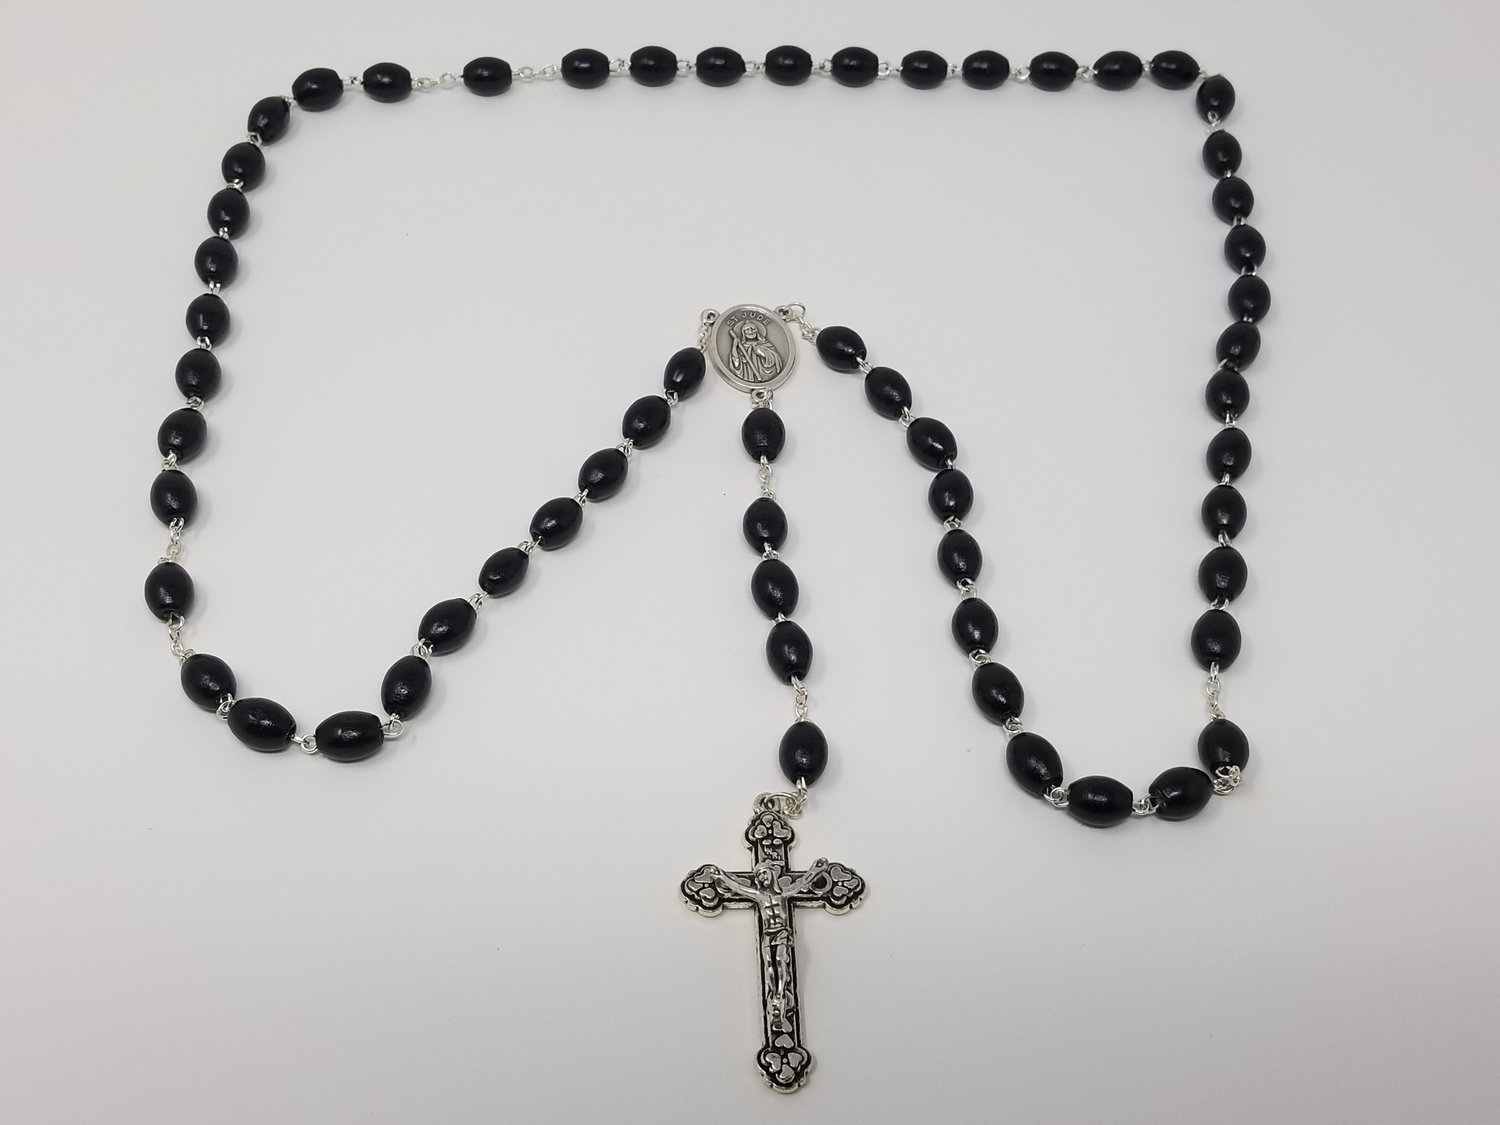 St. Jude Large Black Wood Bead Rosary in Clear Plastic Case